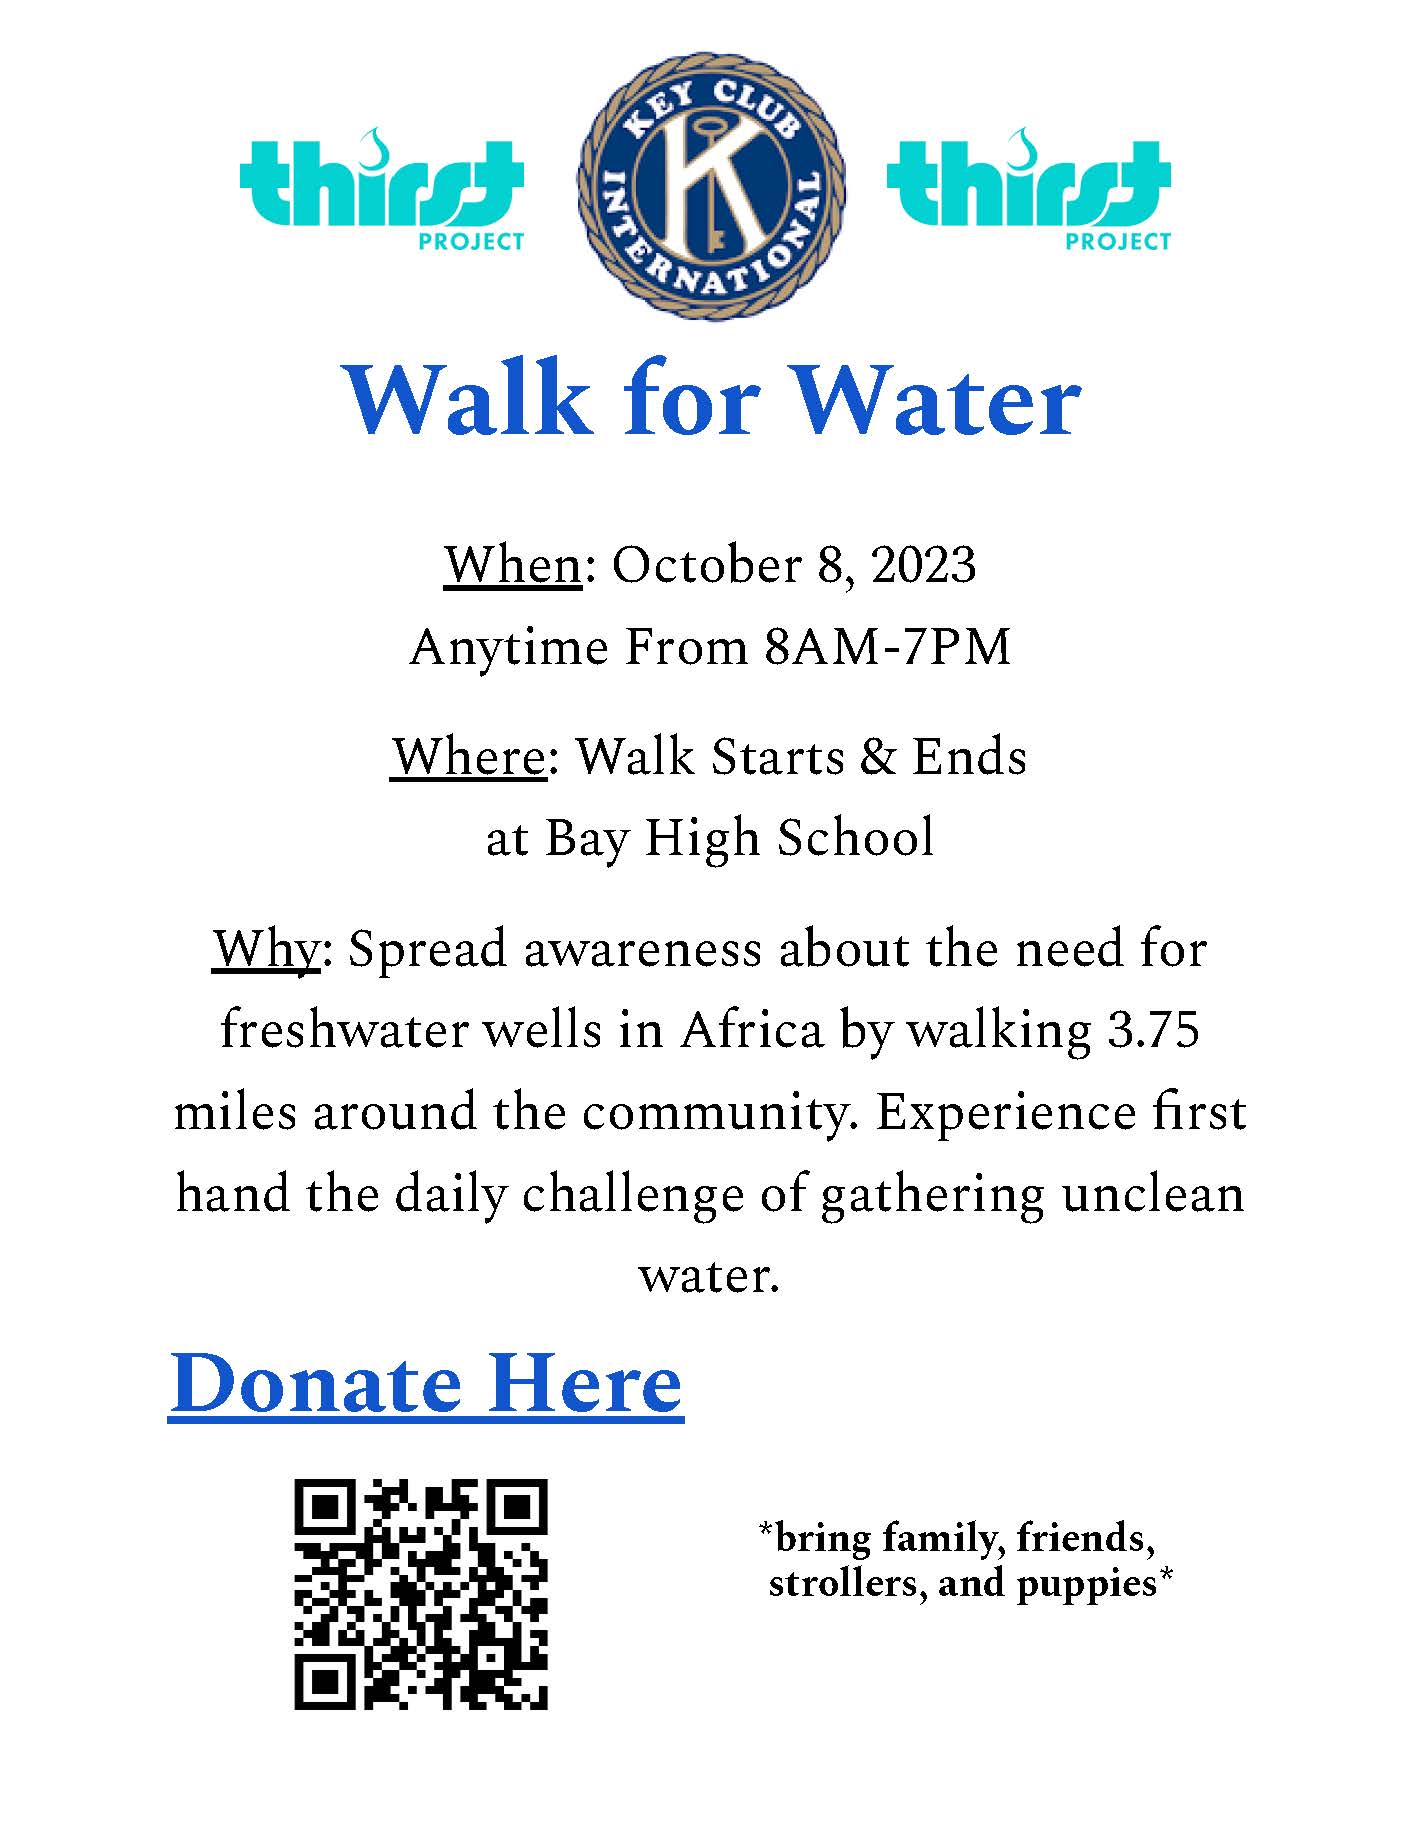 Walk for Water event flyer